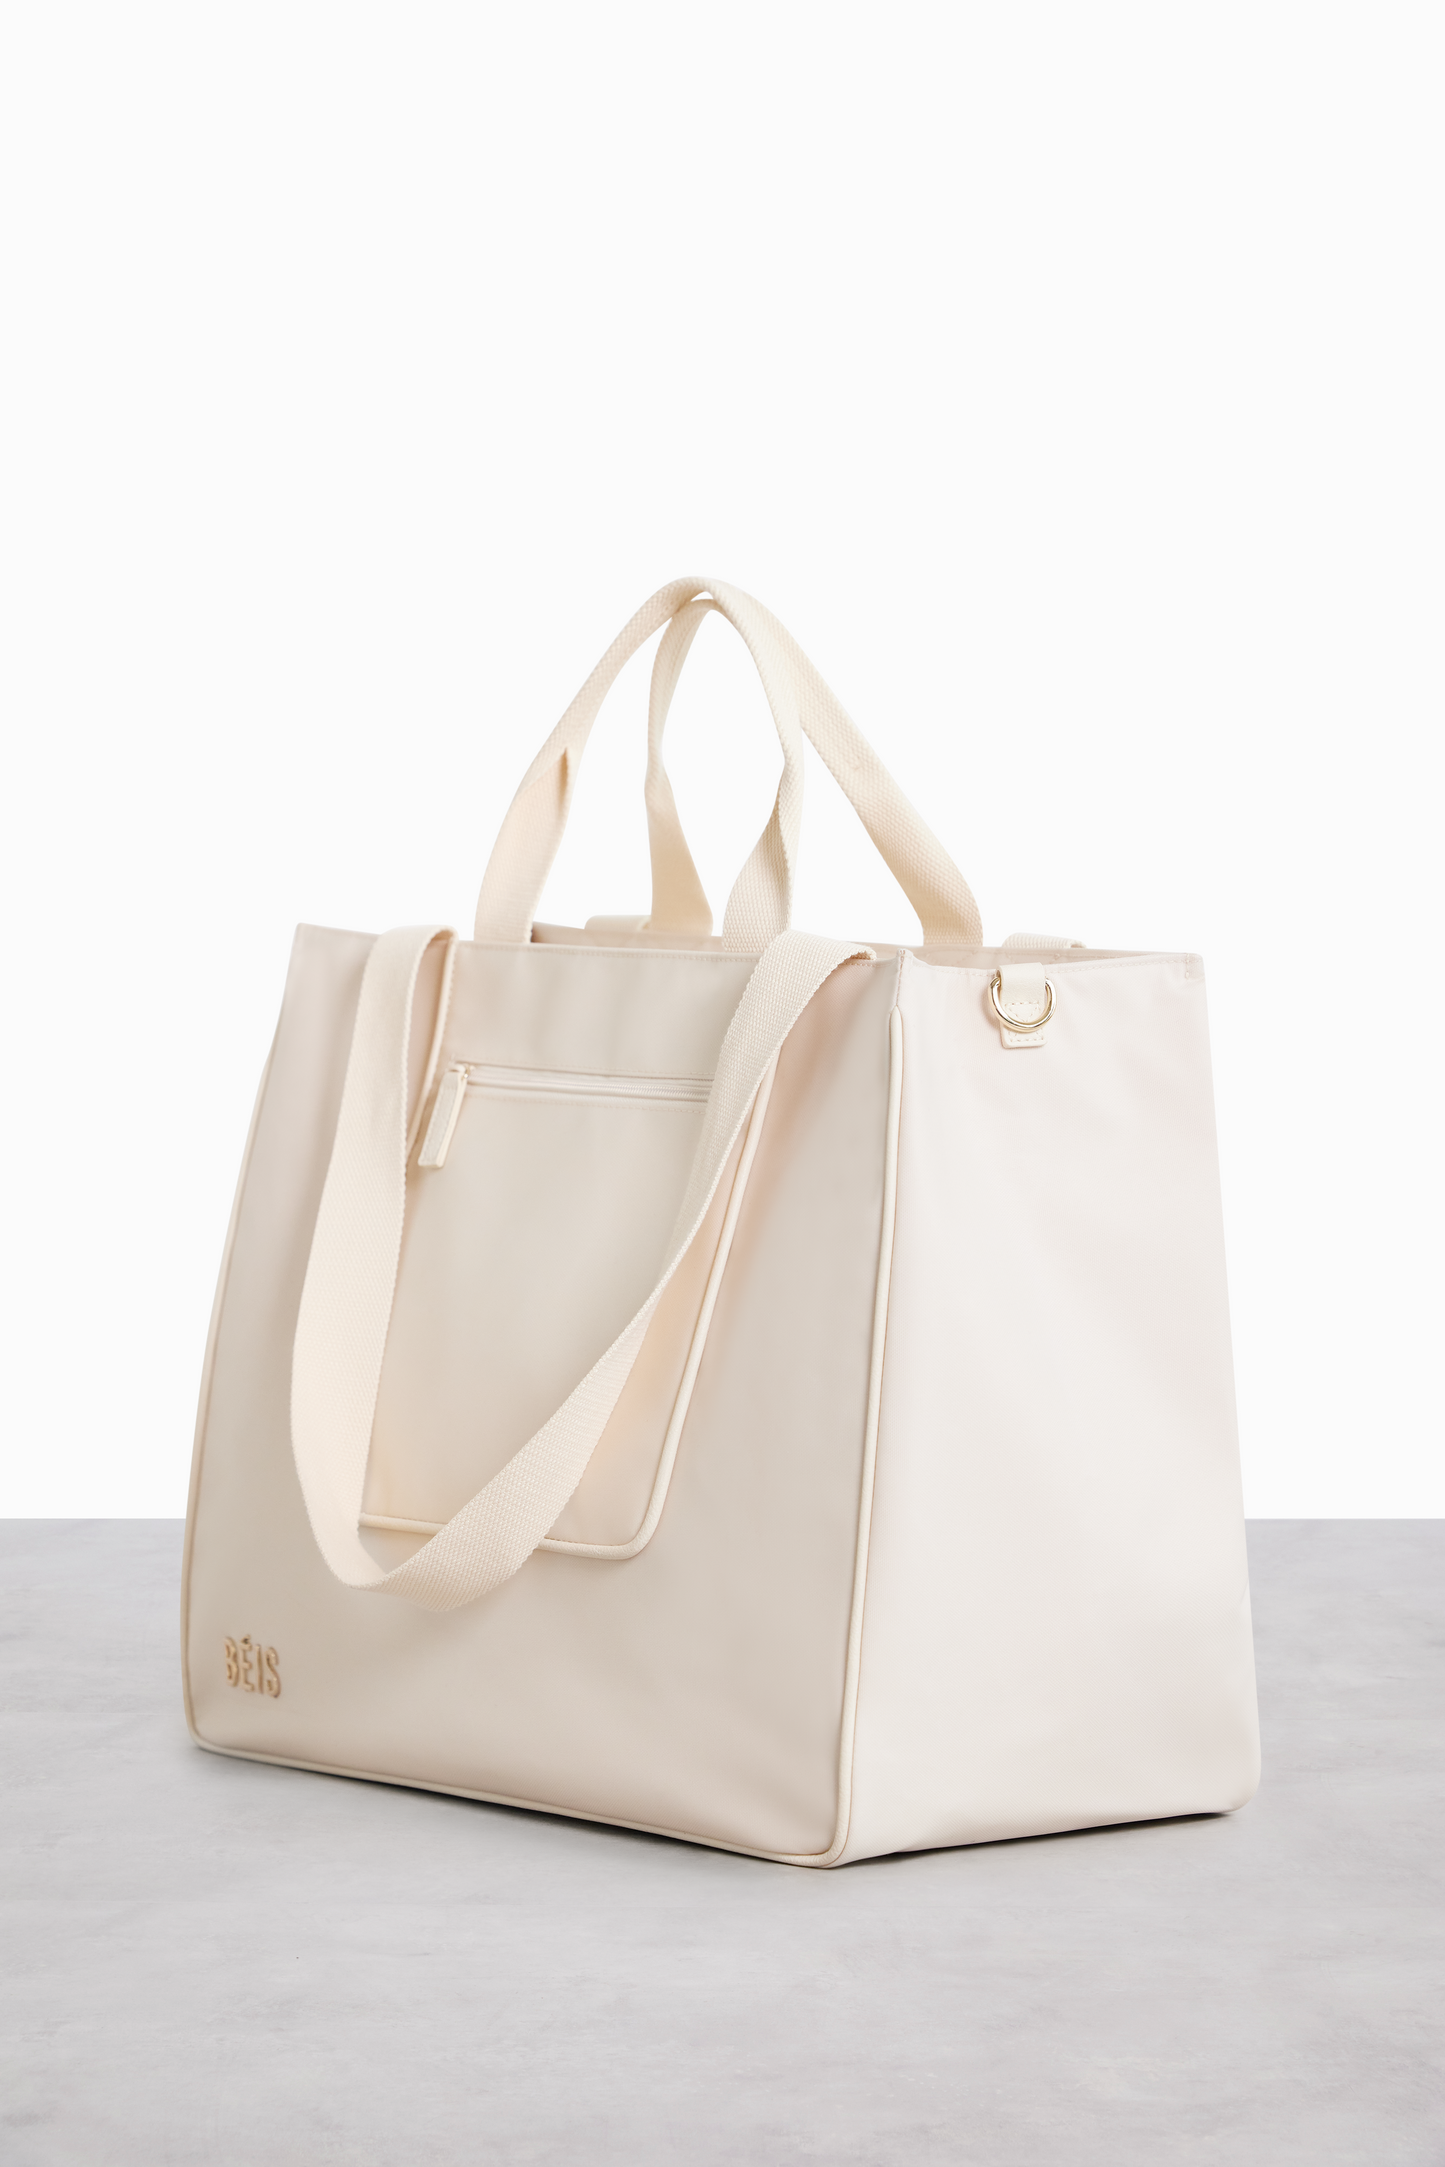 The East To West Tote in Beige